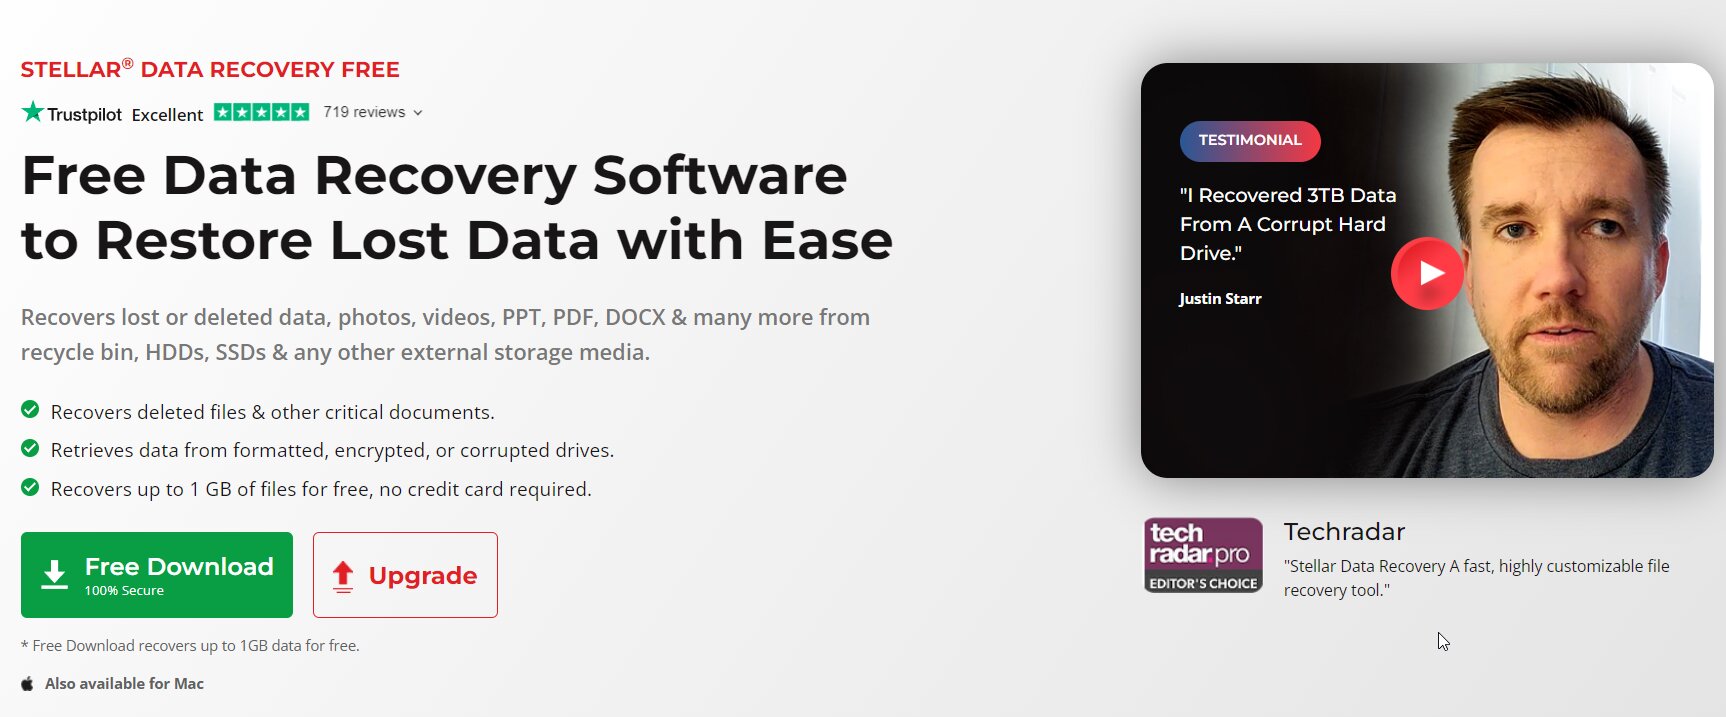 Stellar Data Recovery Free download page